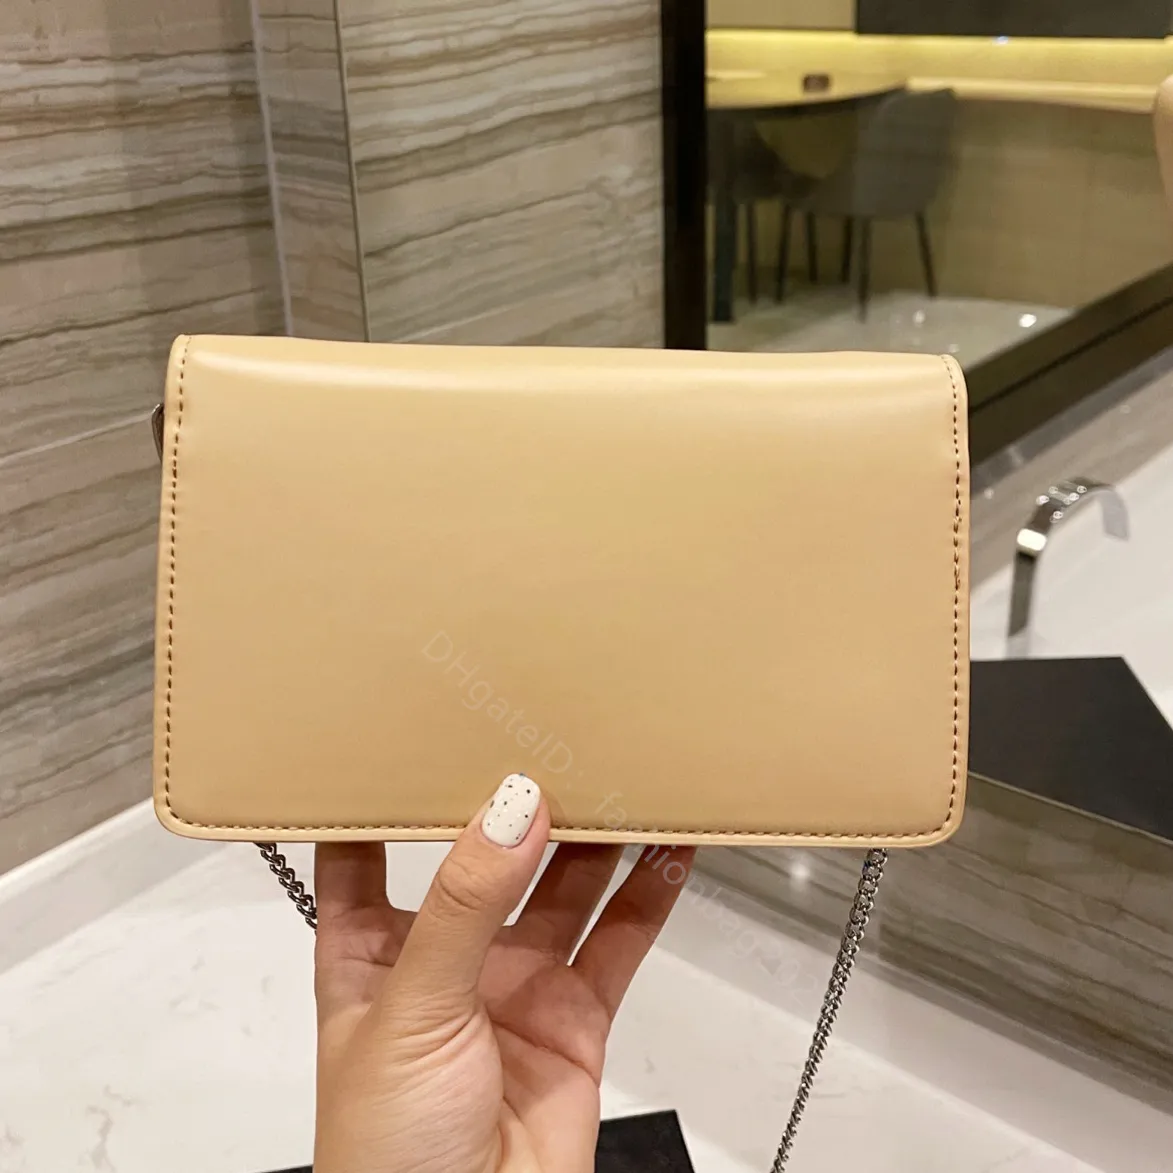 Chain Top quality plain Patent Leather Luxury Designer Bags lady shoulderSmooth practical Underarm purse square simple style Totes women fashion new hot wallets